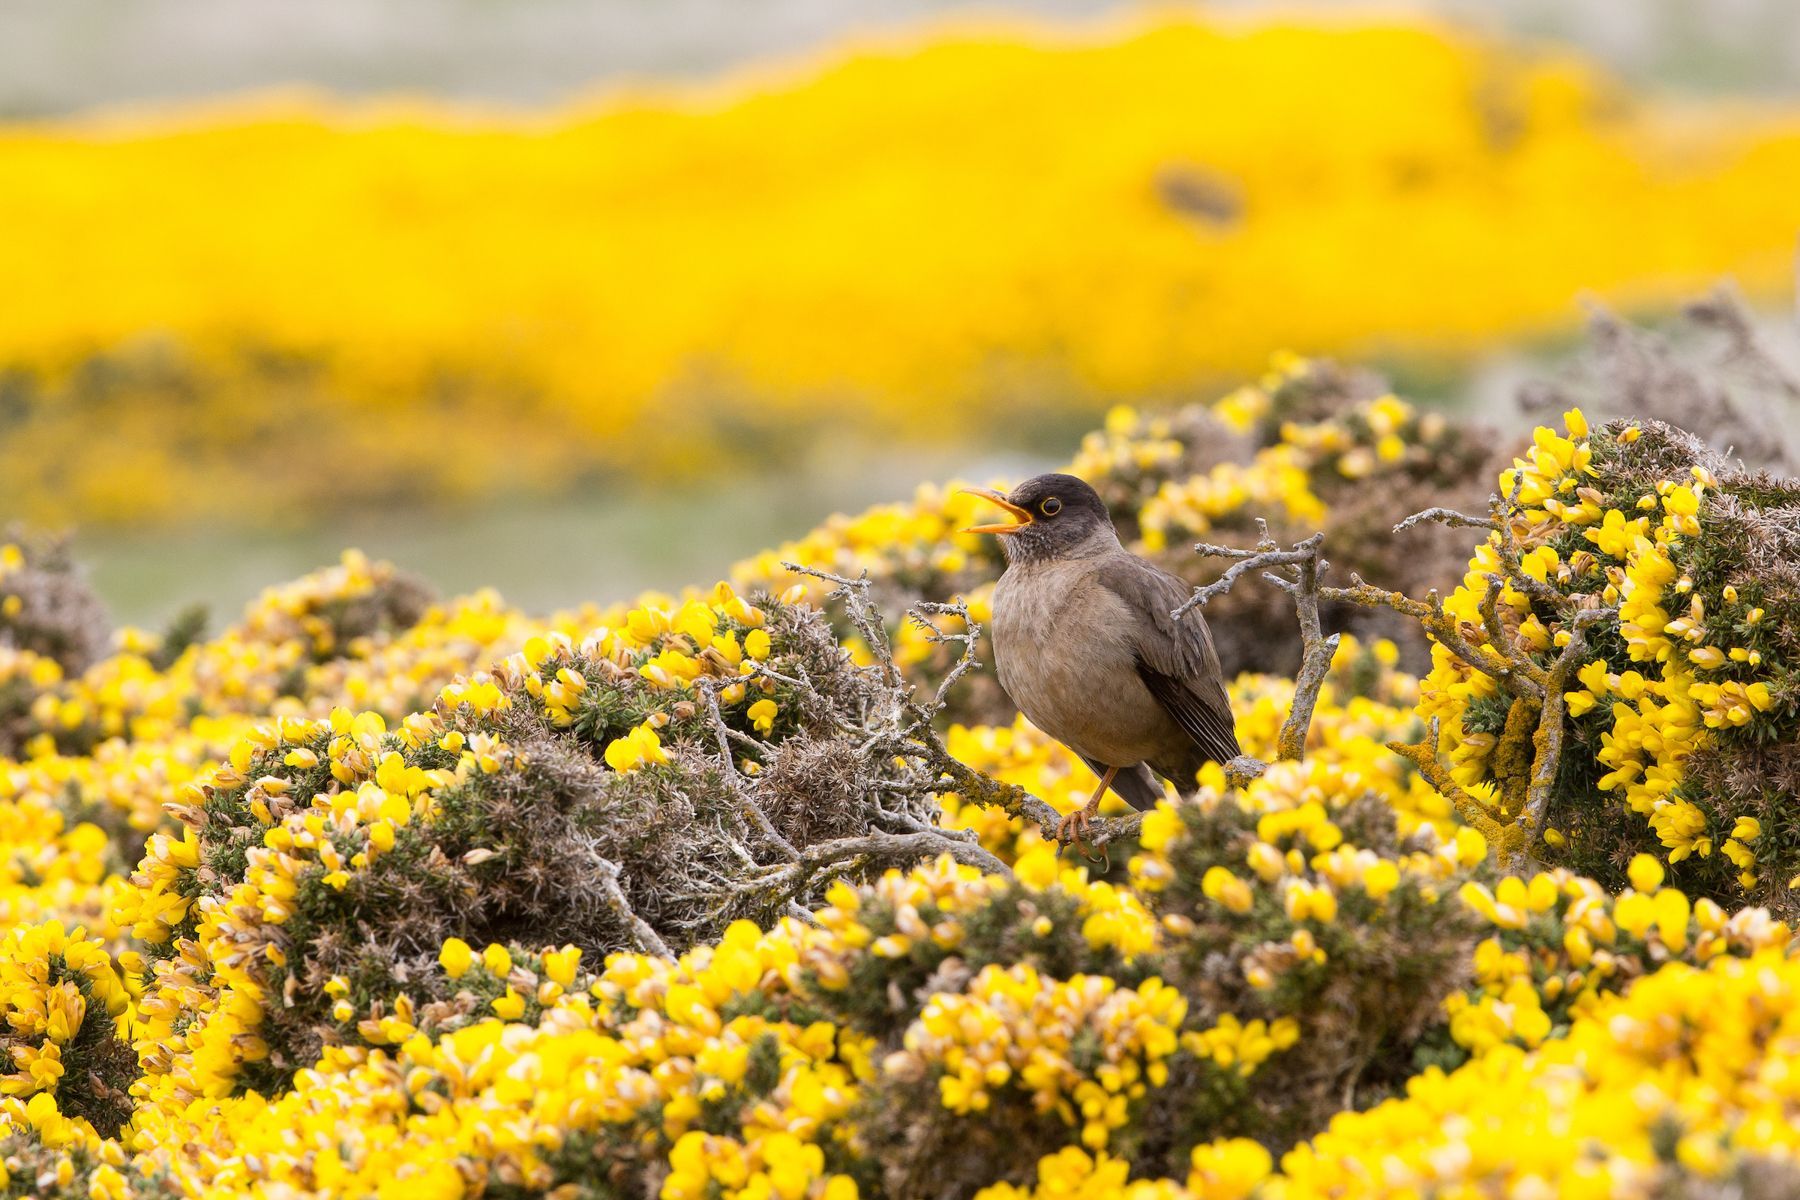 Austral Thrush in the Falkland Islands gorse